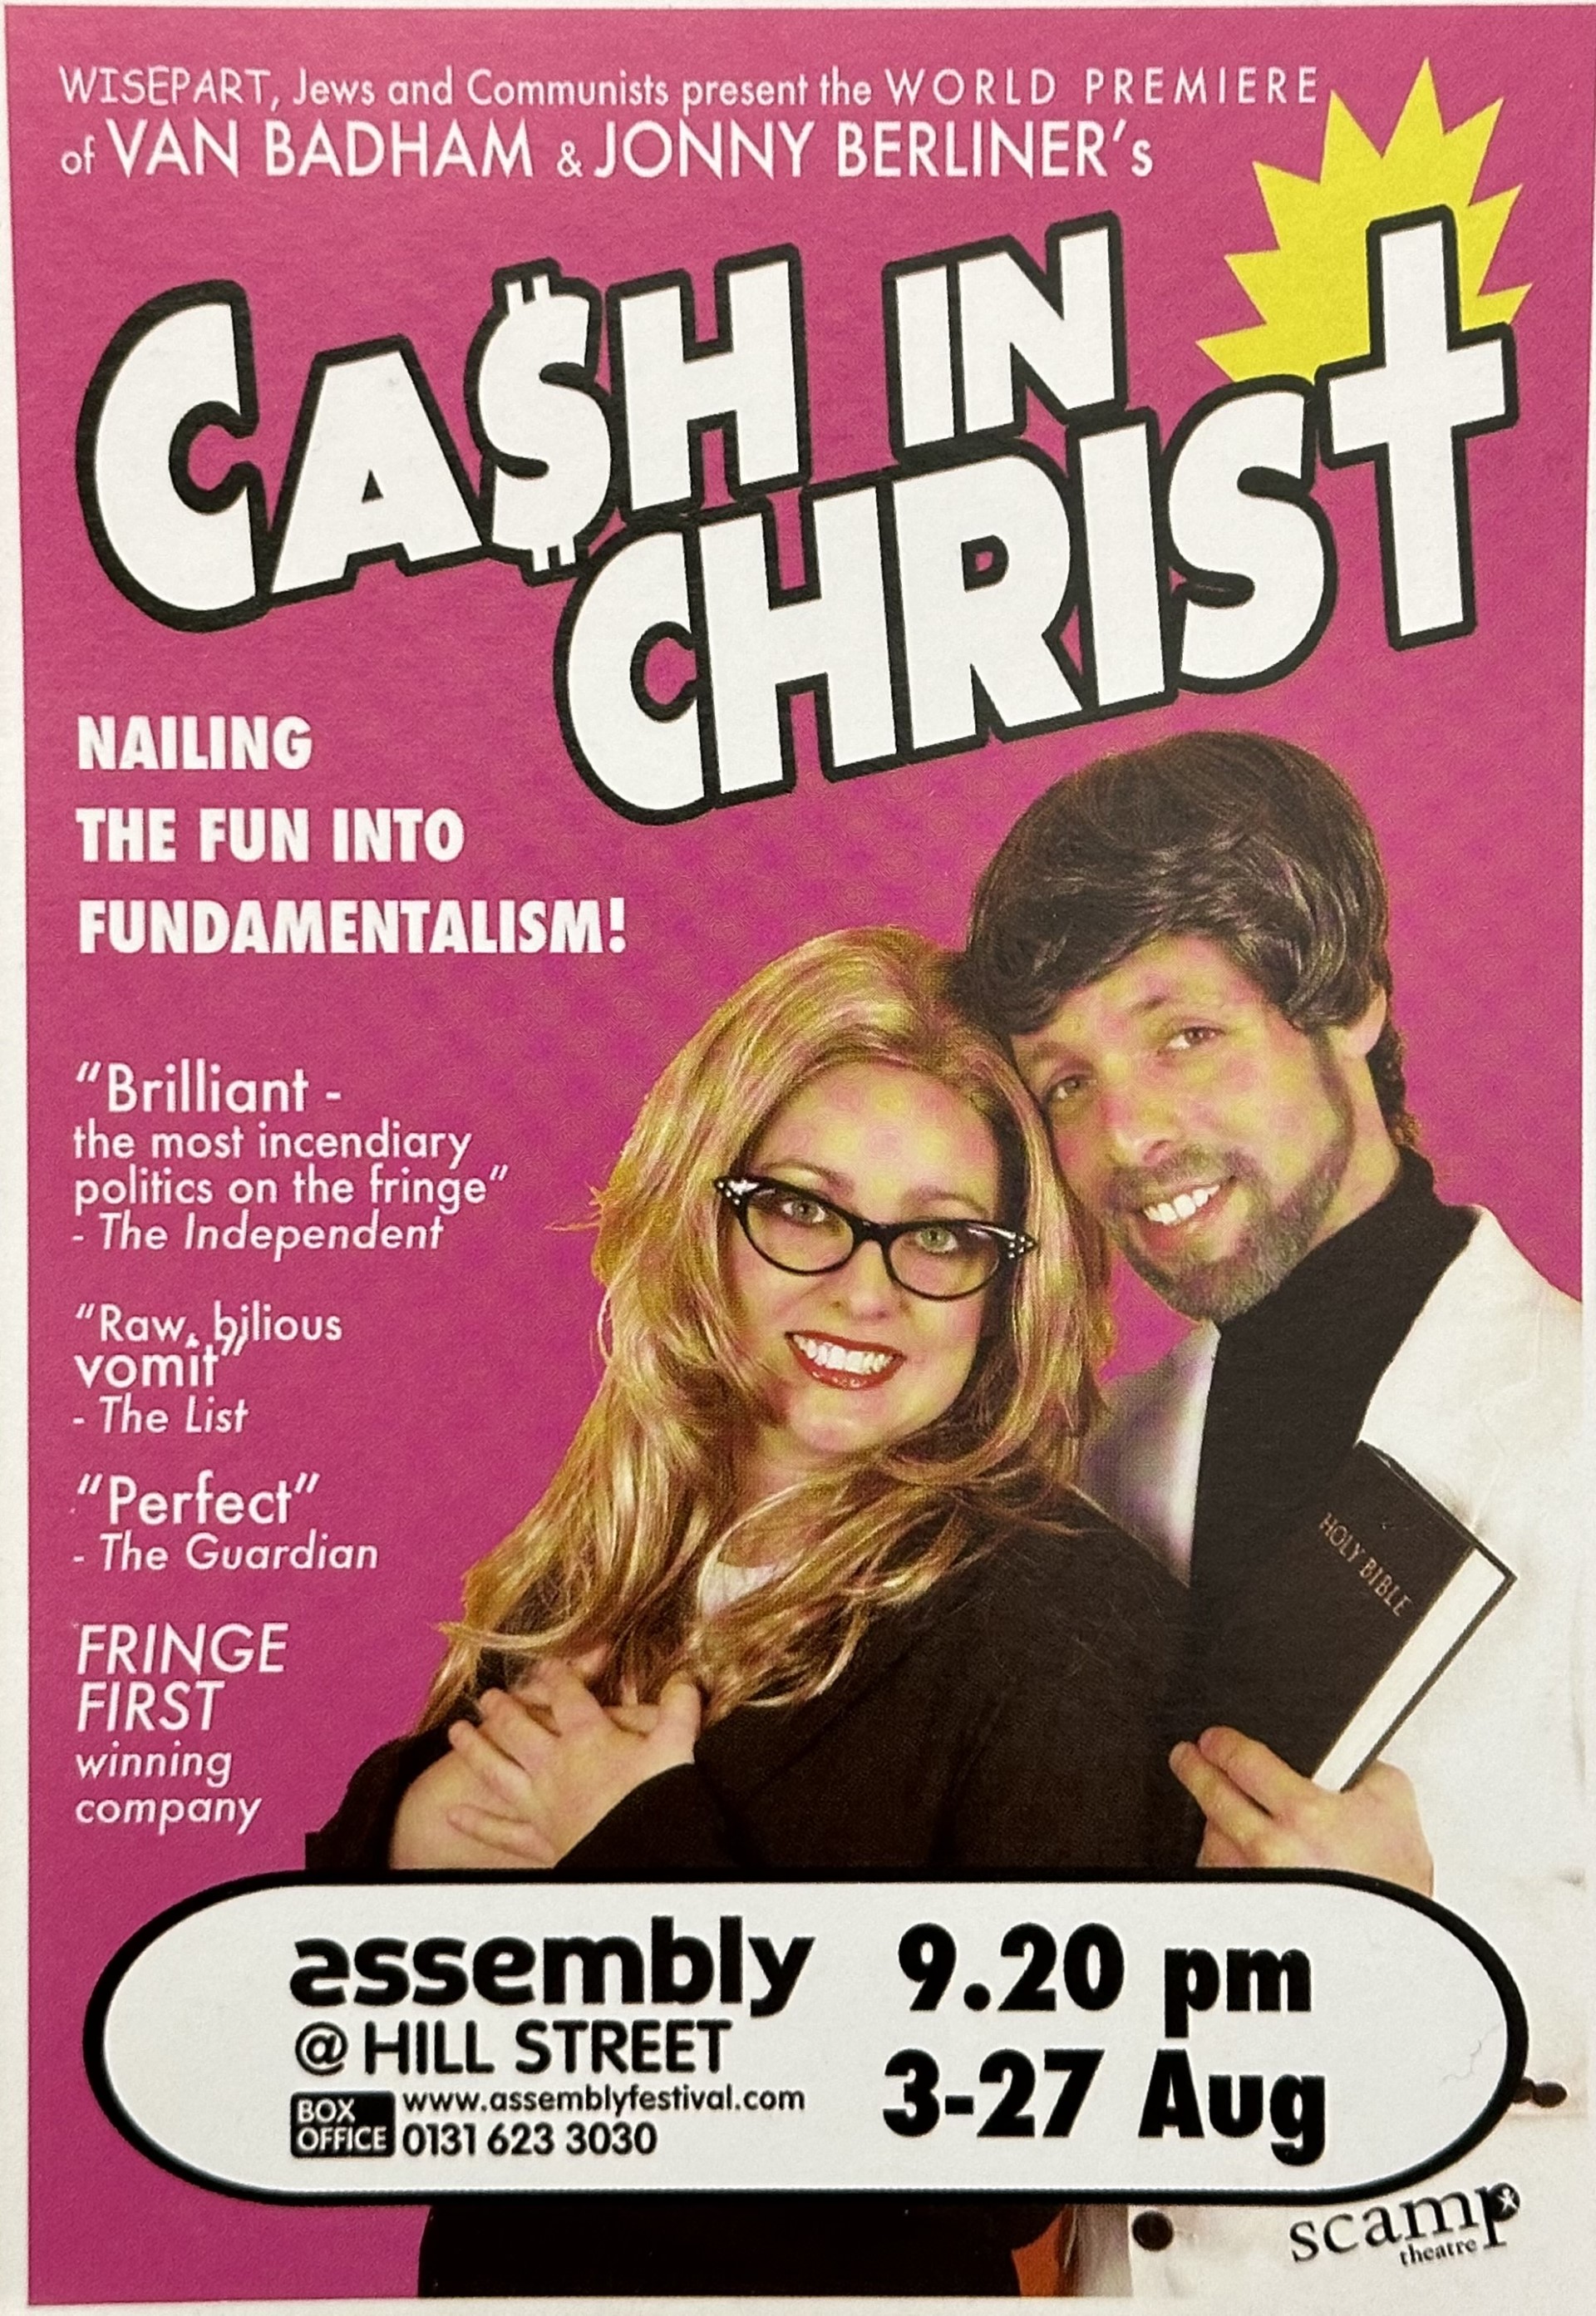 A pink poster with two white people dressed as Evangelicals that reads "Cash in Christ: Nailing the fun into fundamentalism!"